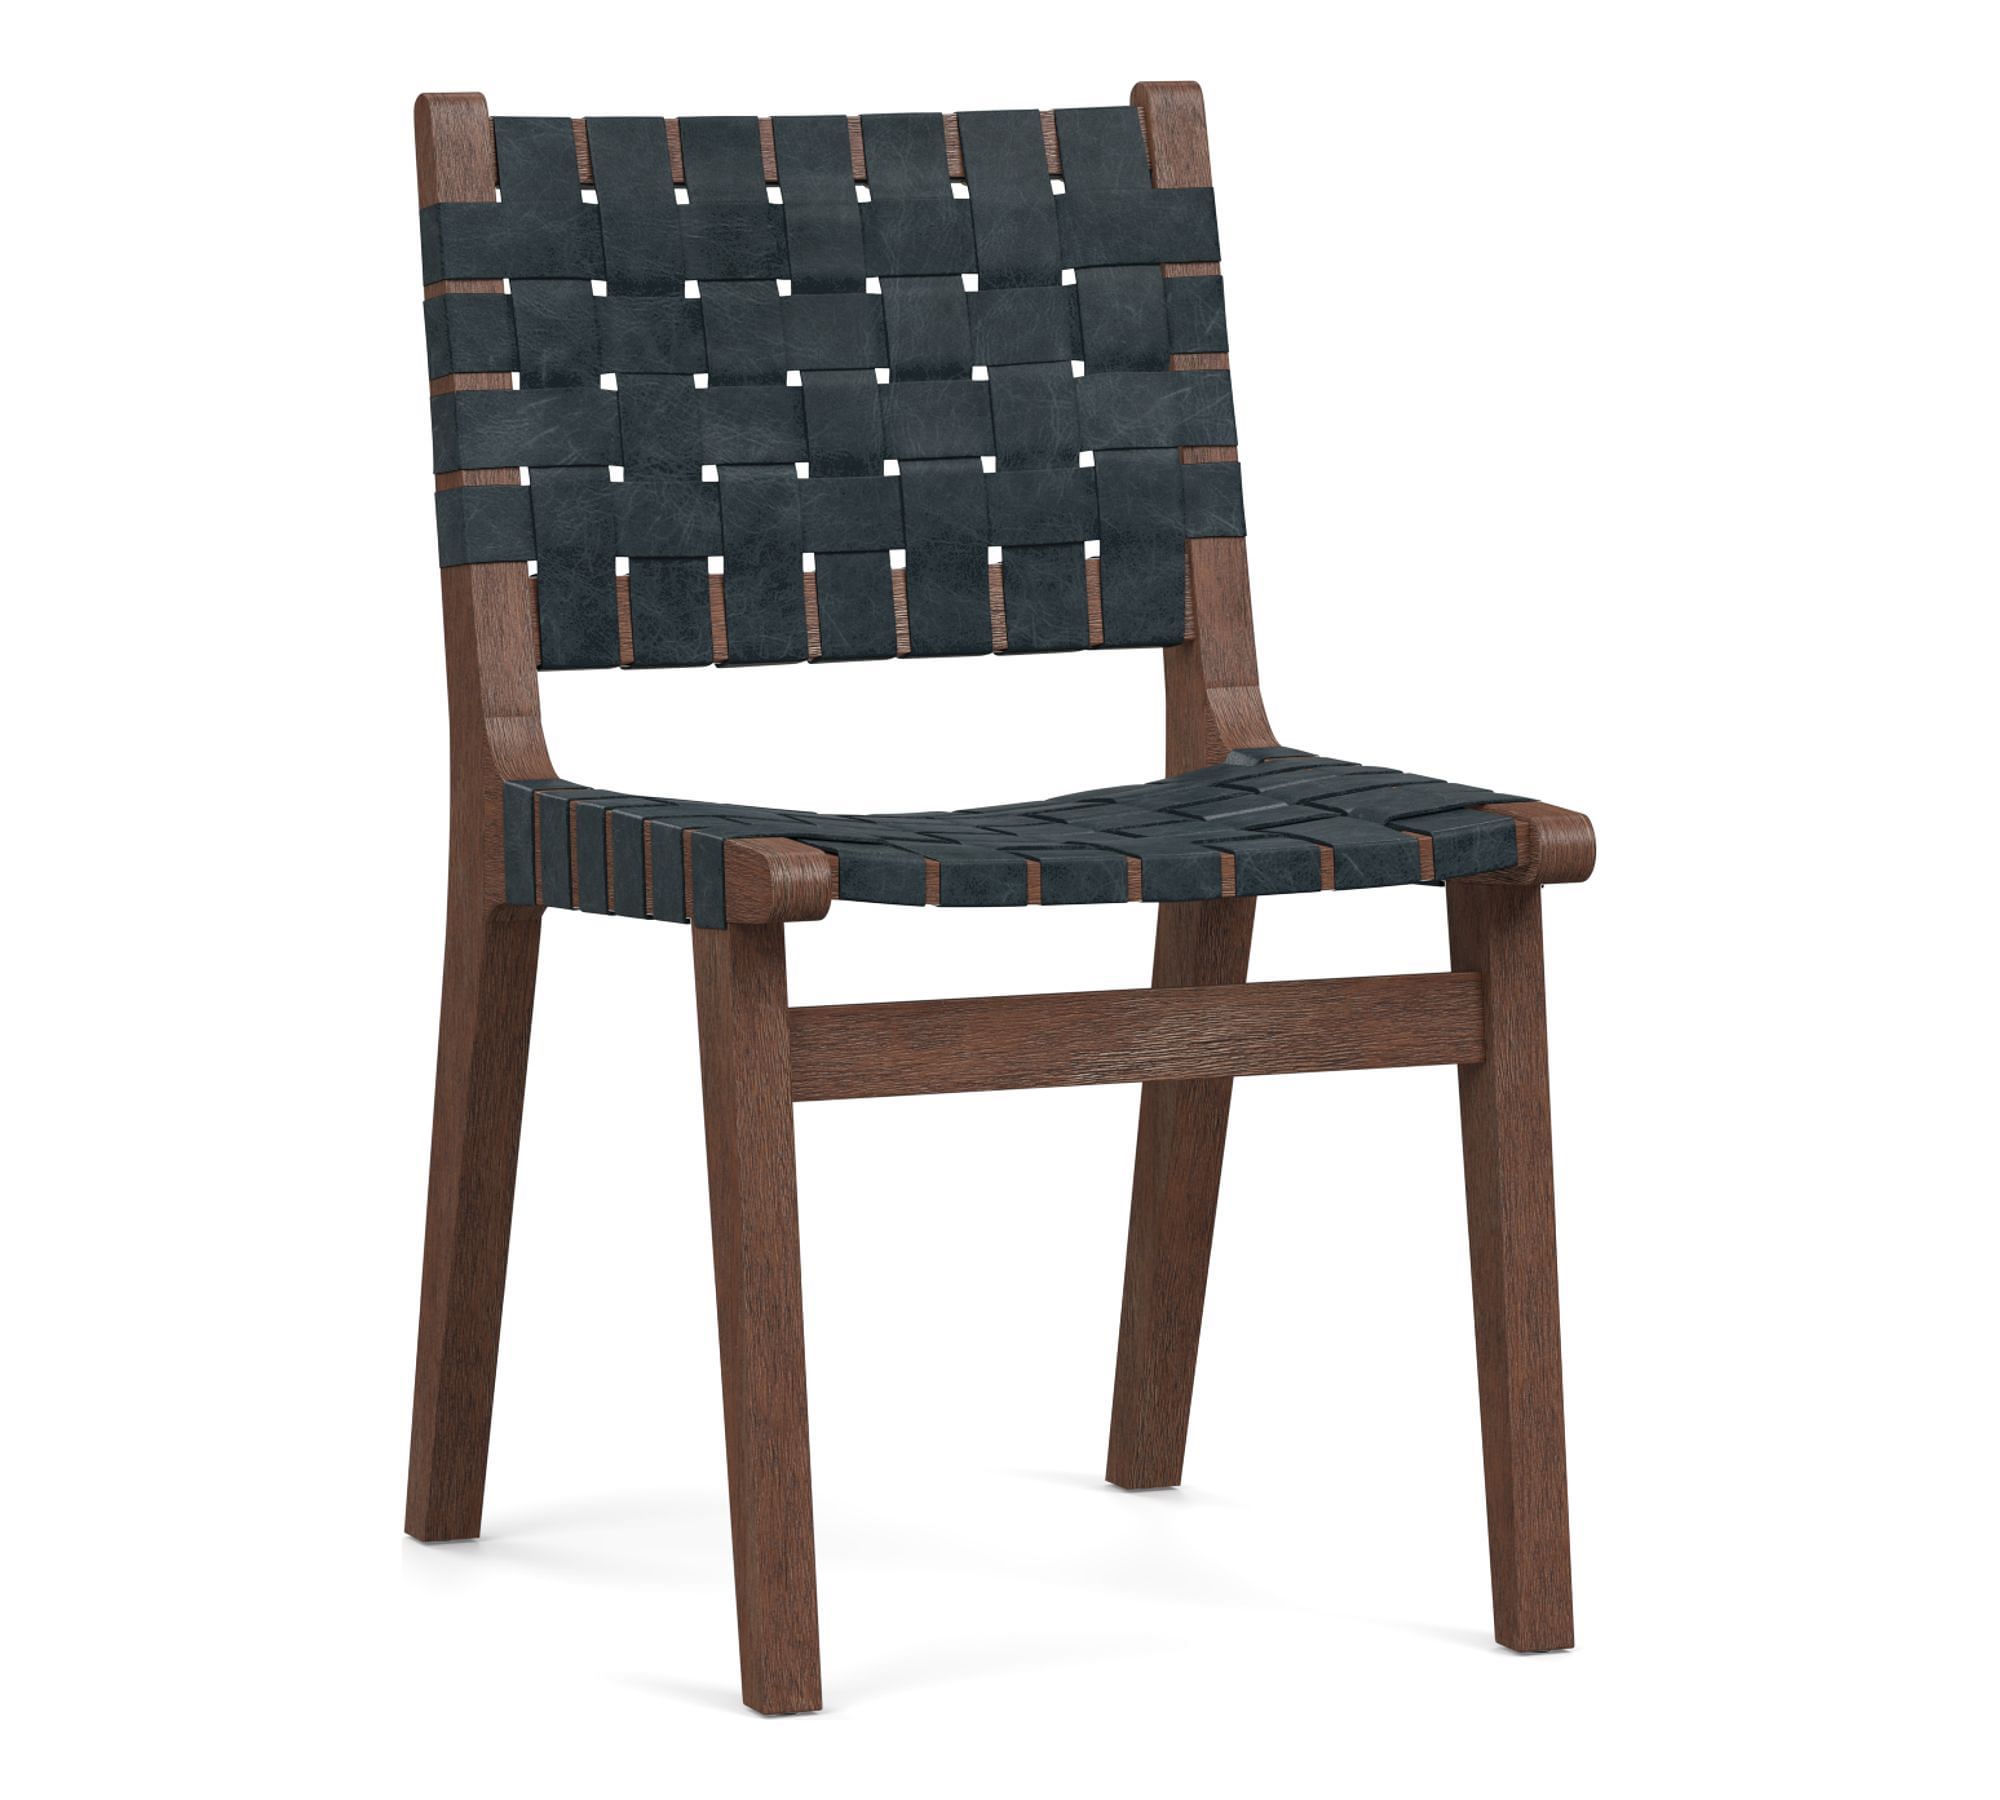 Fenton Woven Leather Dining Chair